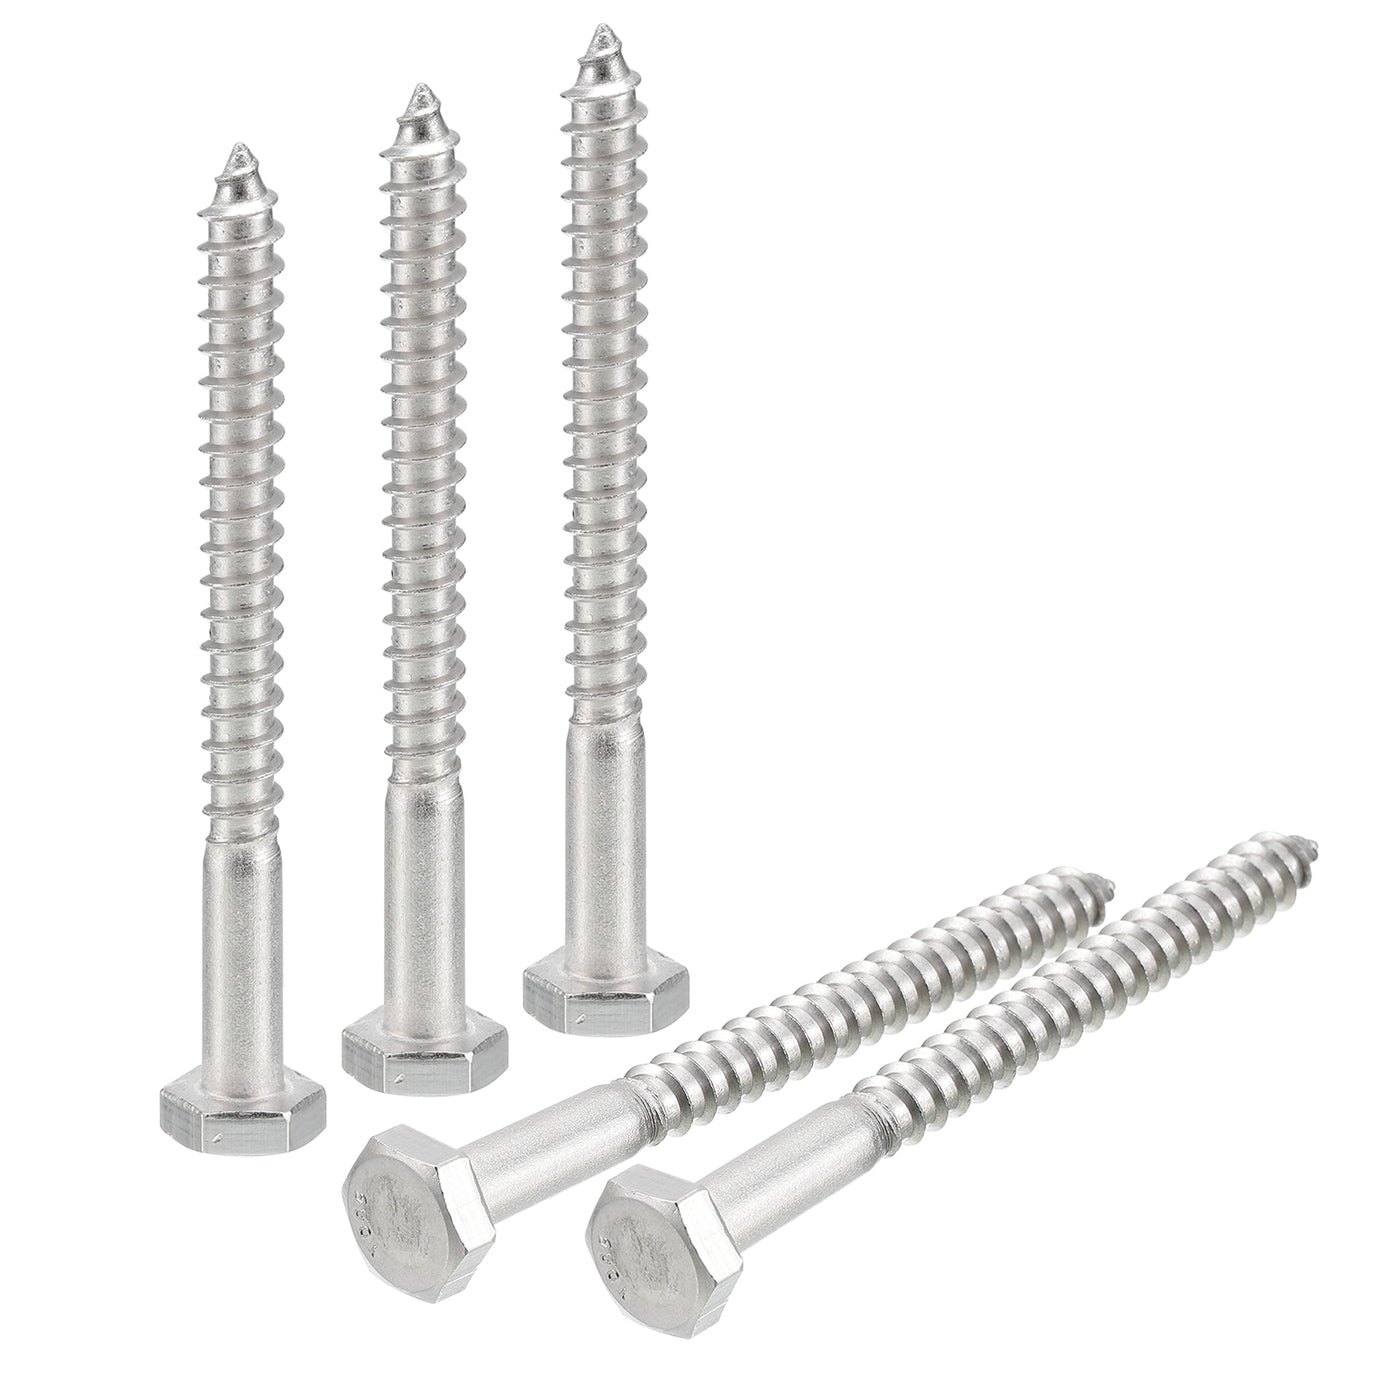 uxcell Uxcell Hex Head Lag Screws Bolts, 25pcs 1/4" x 3" 304 Stainless Steel Wood Screws